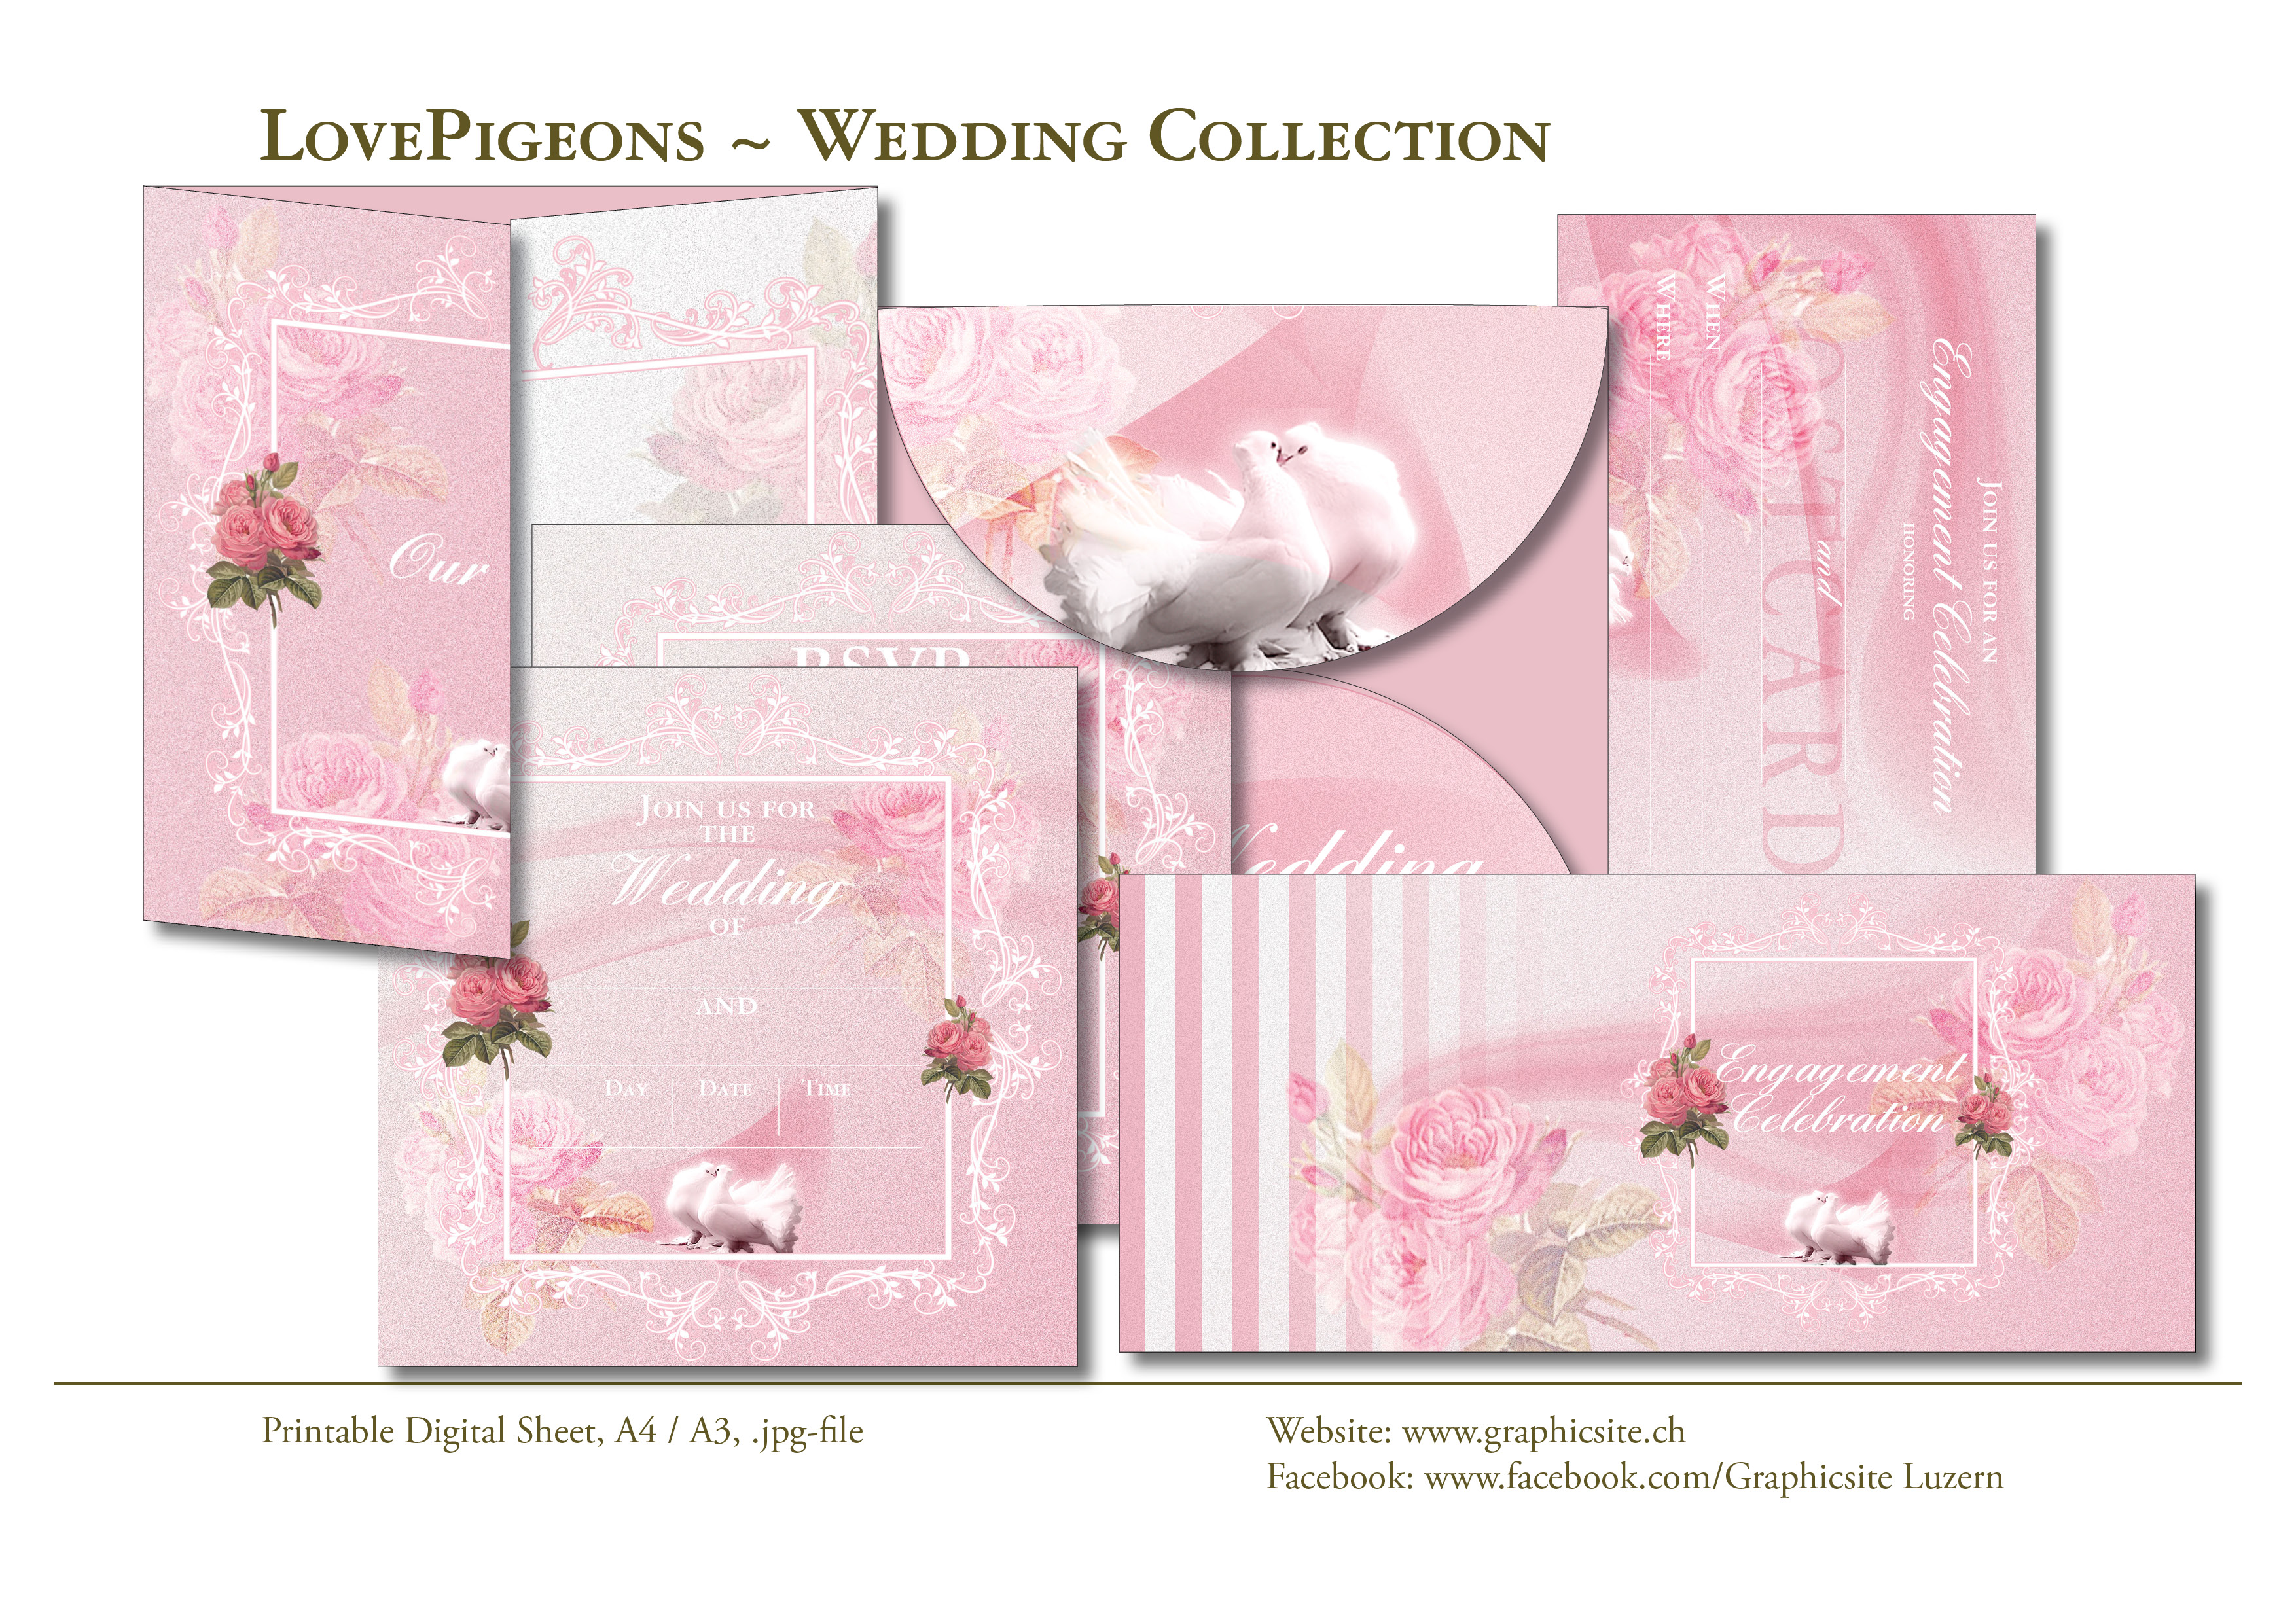 Printable Digital Sheets - Wedding Collections - LovePigeons, #printable, #digital, #sheets, #wedding, #invitation, #cards, #stationary, #scrapbooking,